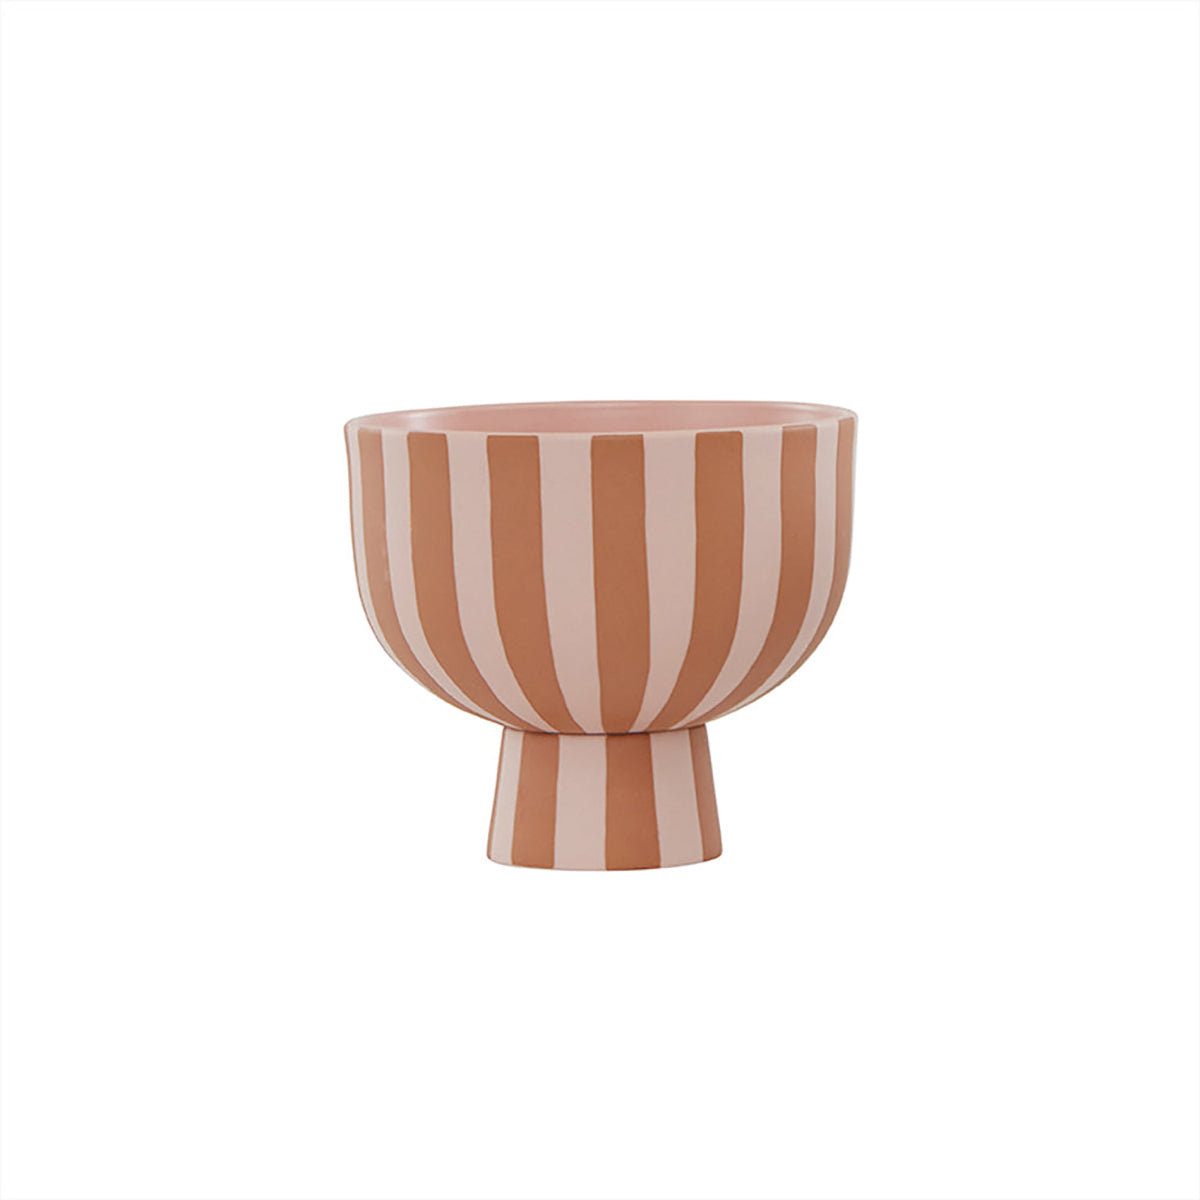 Load image into Gallery viewer, OYOY LIVING Toppu Bowl Vase 307 Caramel / Rose
